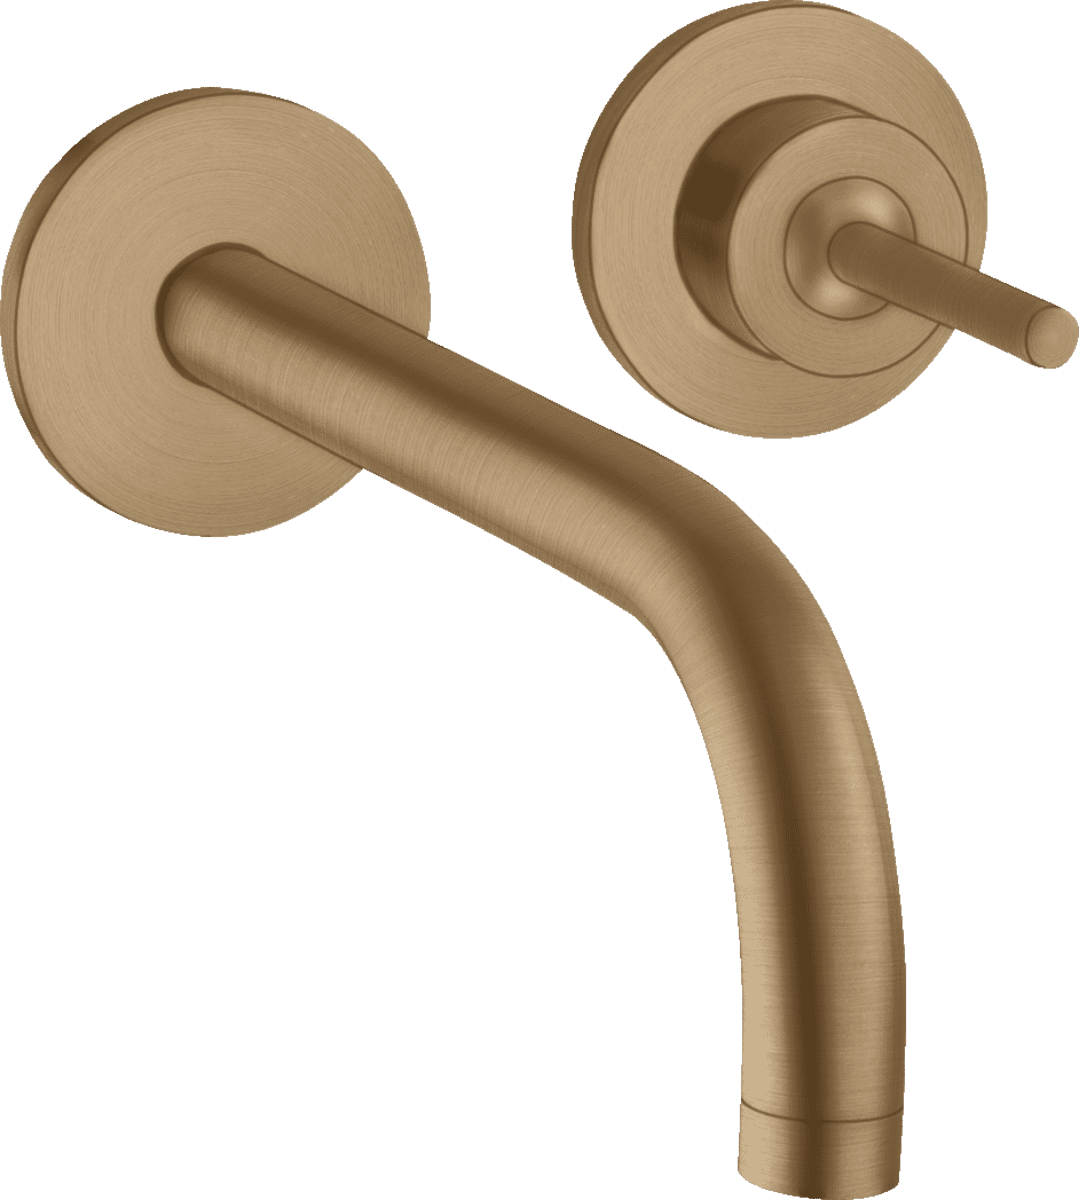 HANSGROHE AXOR Uno Single lever basin mixer for concealed installation wall-mounted with spout 225 mm and escutcheons #38116140 - Brushed Bronze resmi